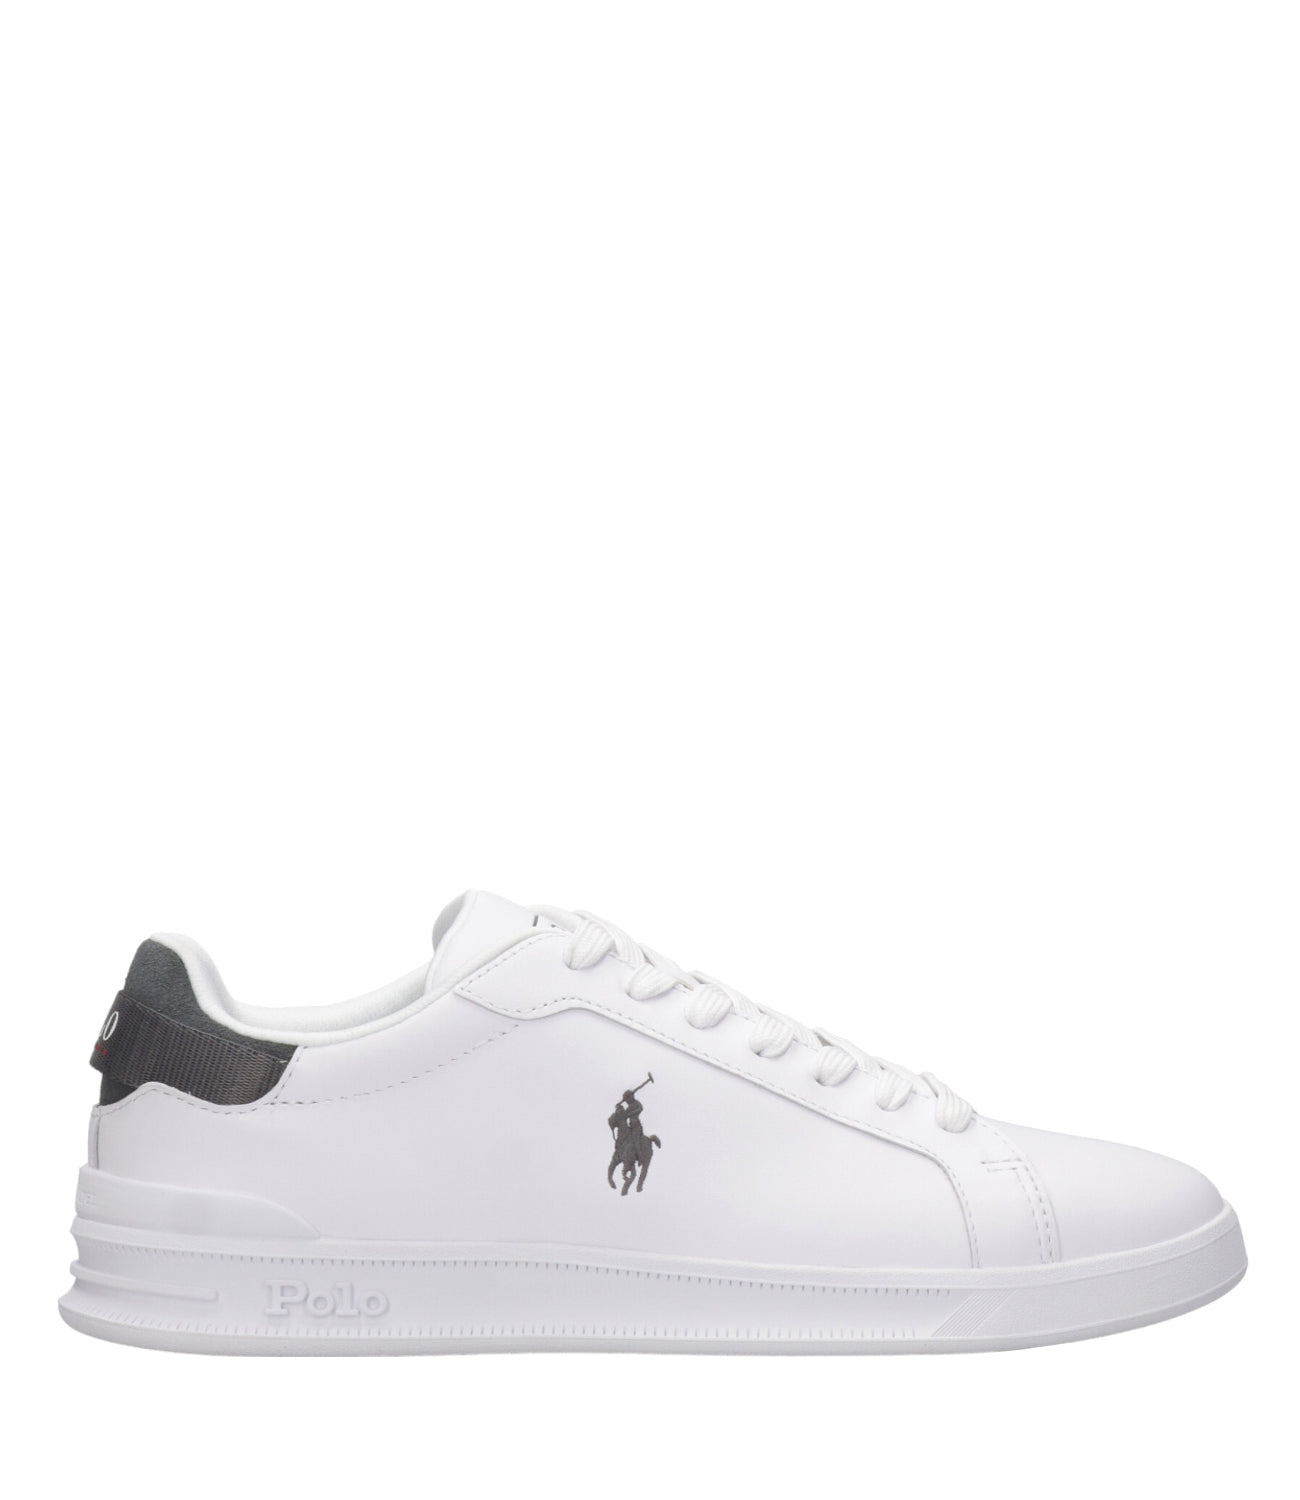 Polo Ralph Lauren | Heritage Court II Sneaker White and Gray